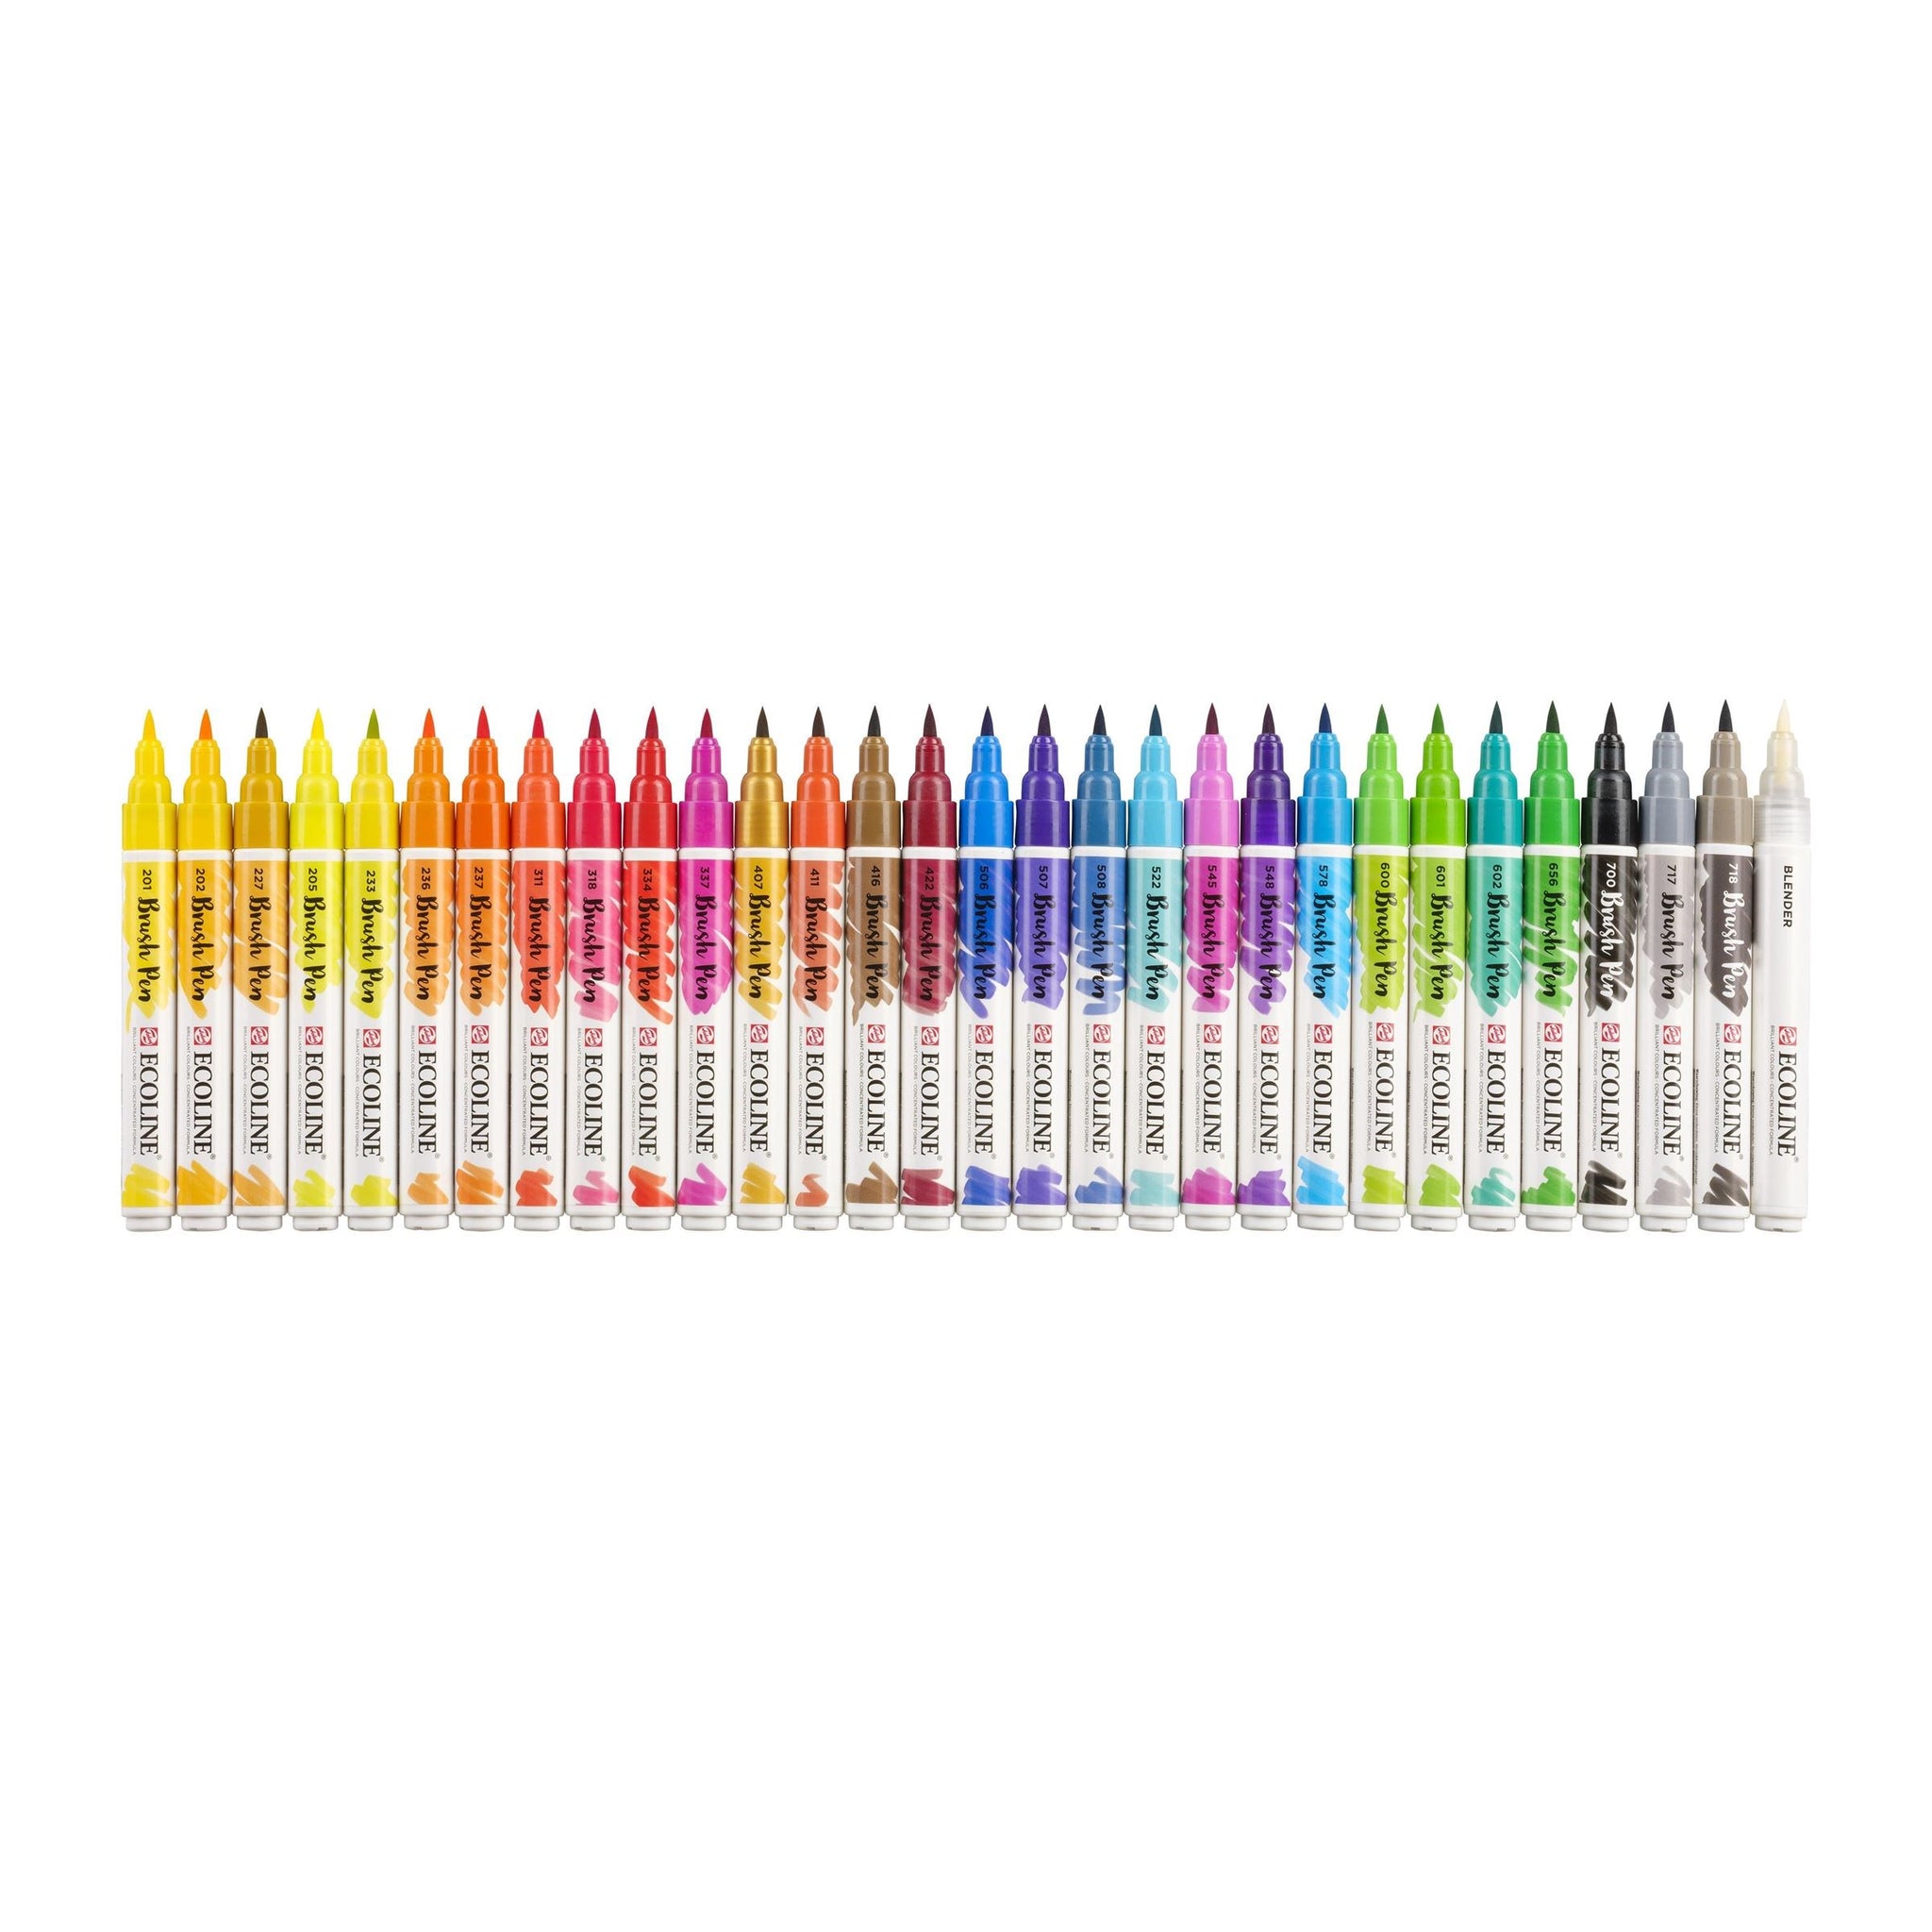 Ecoline Watercolor Brush Pen Sets by Talens